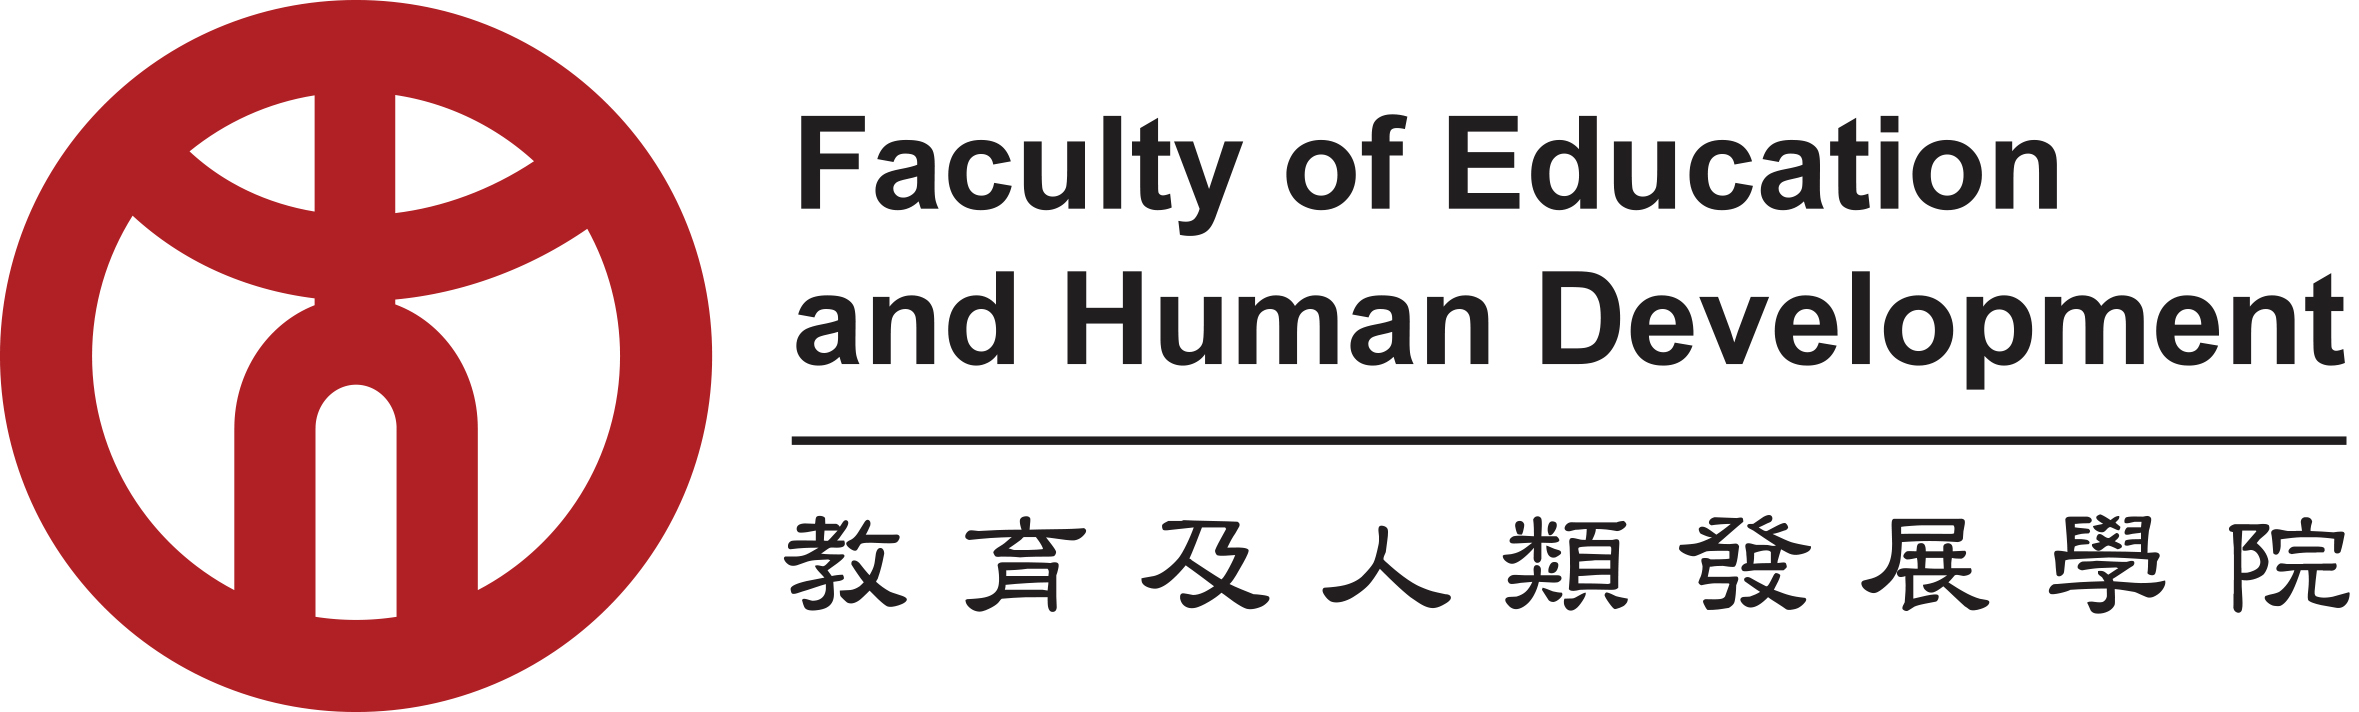 Faculty of Education and Human Development